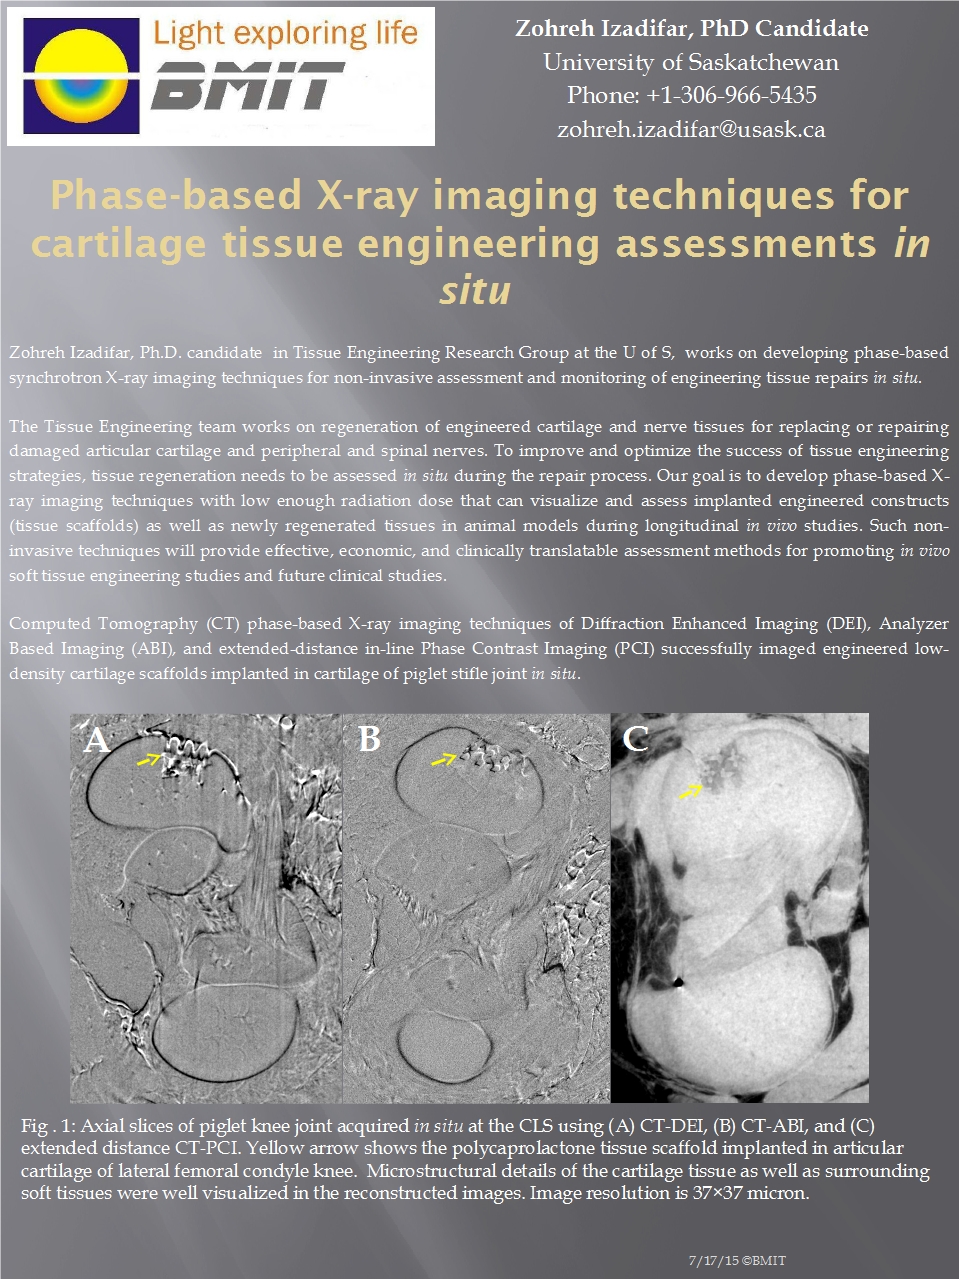 Phase-Based X-Ray Imaging Techniques for Cartilage Tissue Engineering Assessments in Situ Image